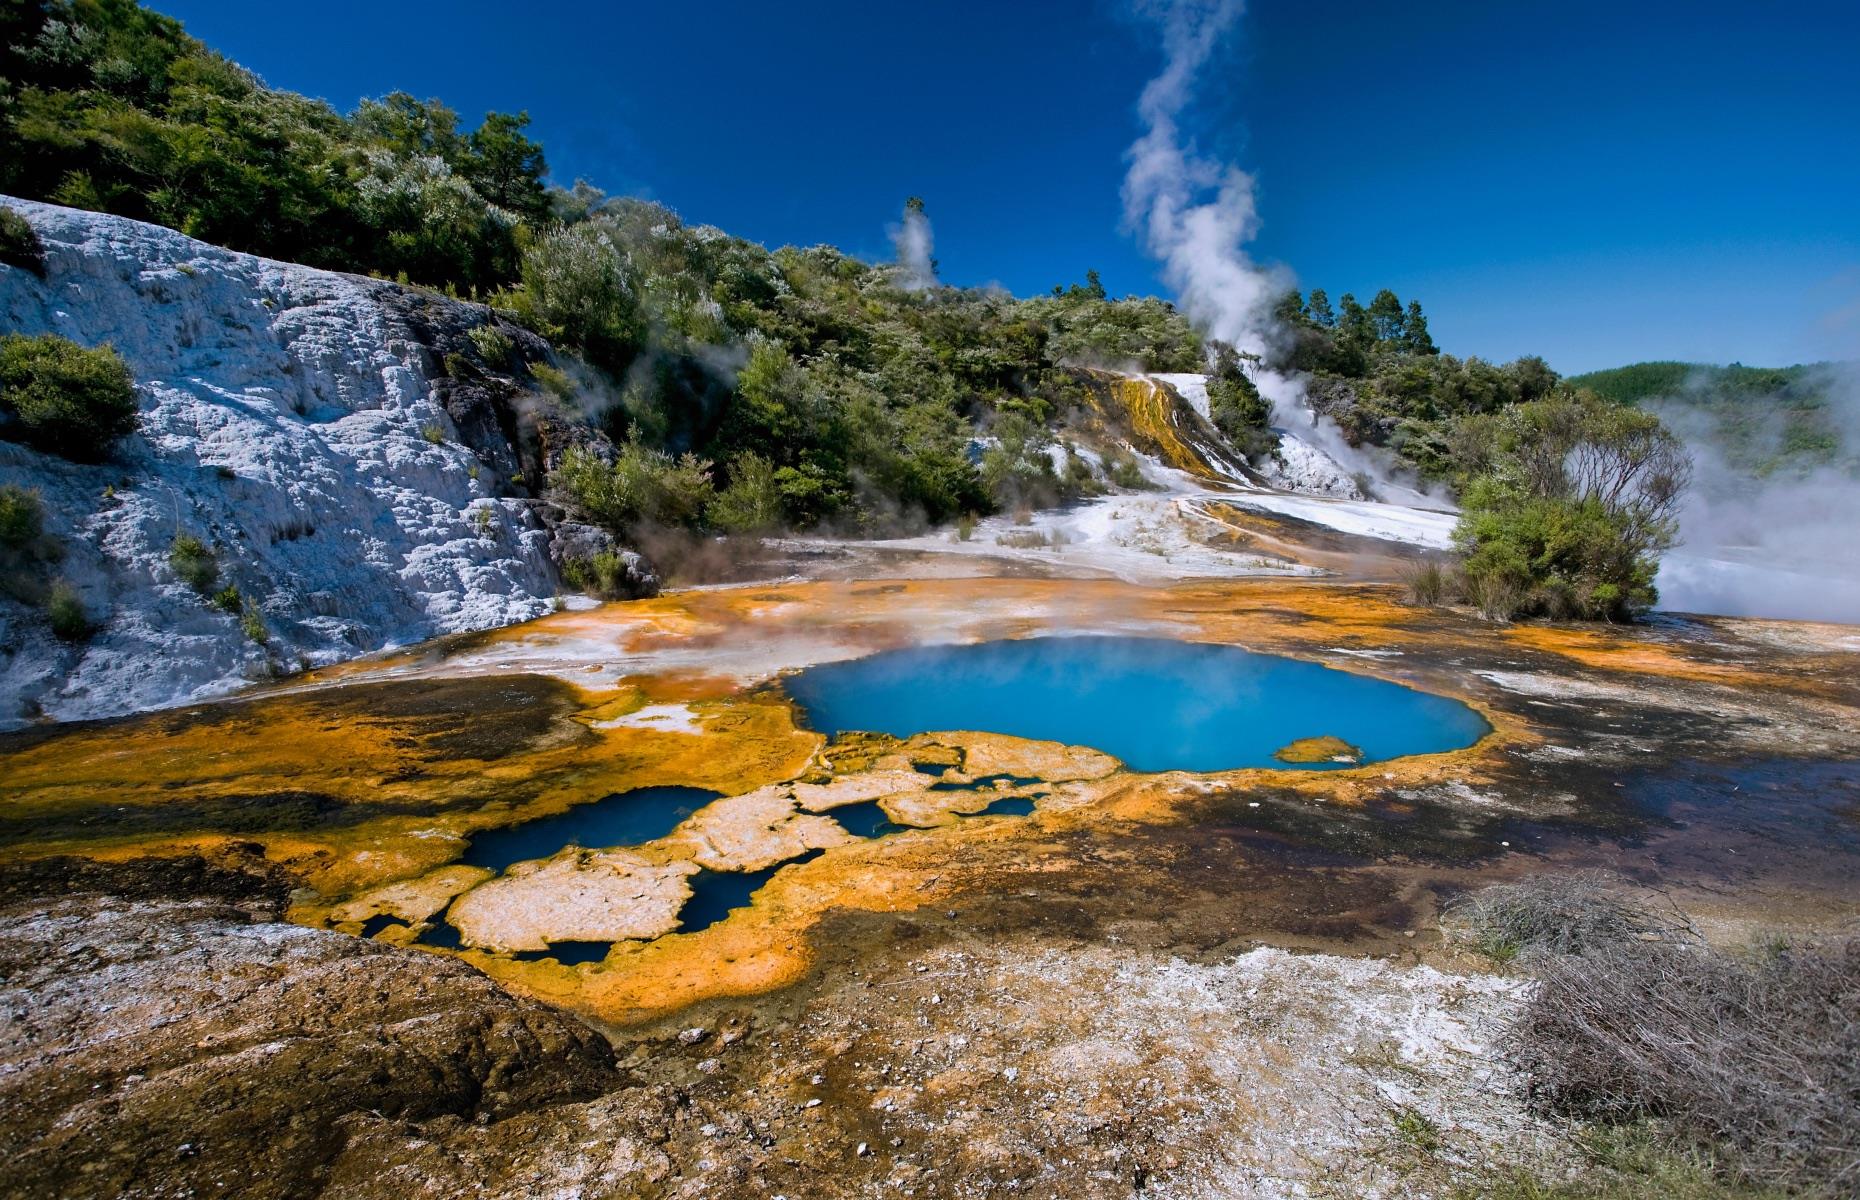 <p>To admire the seismic energy of Mother Nature without the crowds, take the ferry across Lake Ohakuri to the hidden valley of Orakei Korako Geothermal Park. Just as spectacular as Rotorua’s fizzing landscapes, the park’s gigantic, technicolor hot springs, geysers, and mud pools are a bubbling hot soup of geothermal activity. Close to Lake Taupo, the area makes a great addition to an itinerary exploring the region’s other highlights, including Waitomo Caves and Huka Falls.</p>